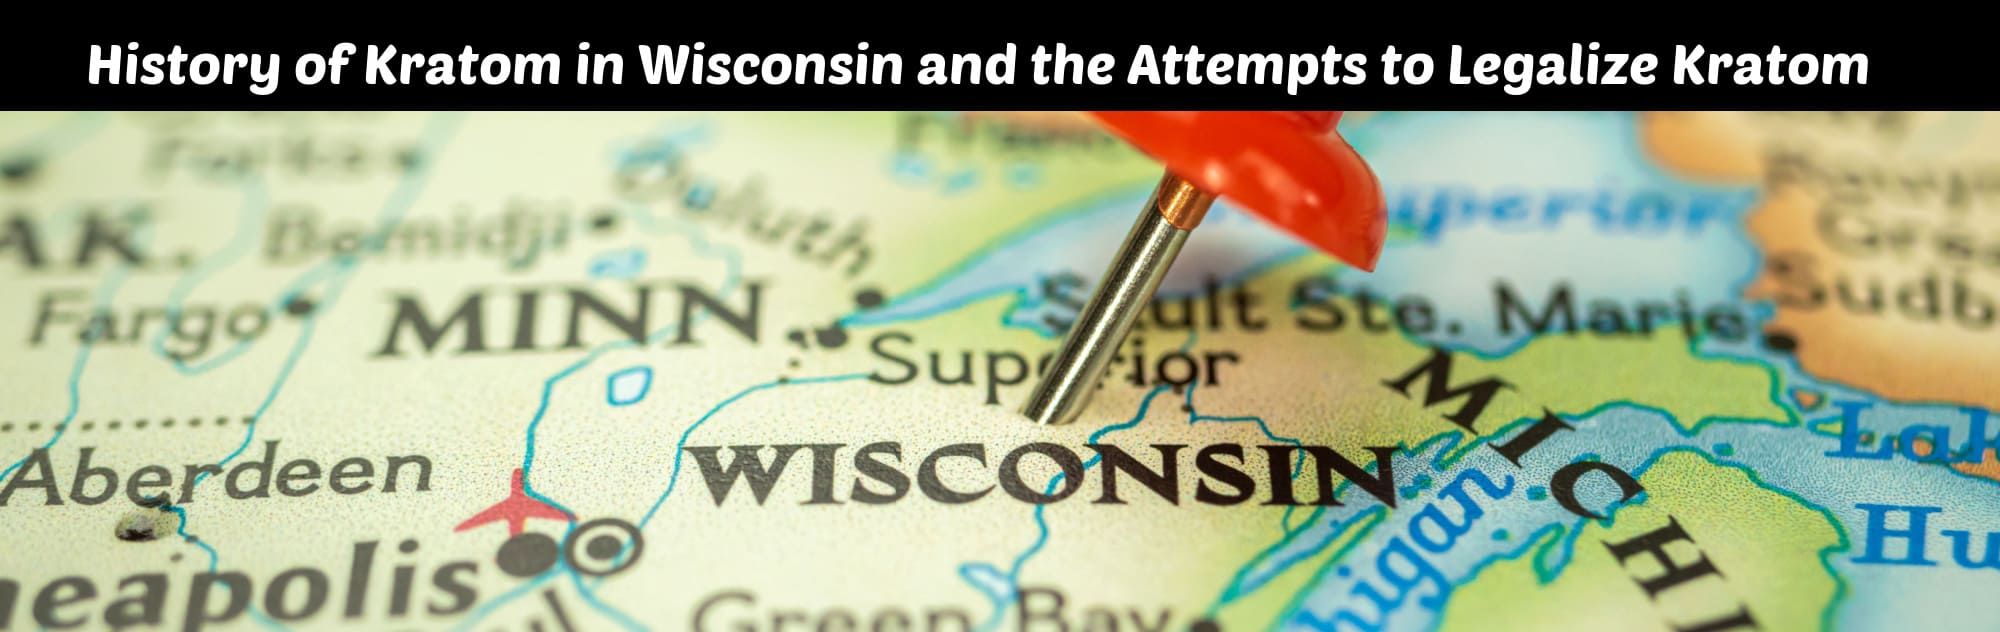 image of history of kratom in wisconsin and the attempts of legalize kratom